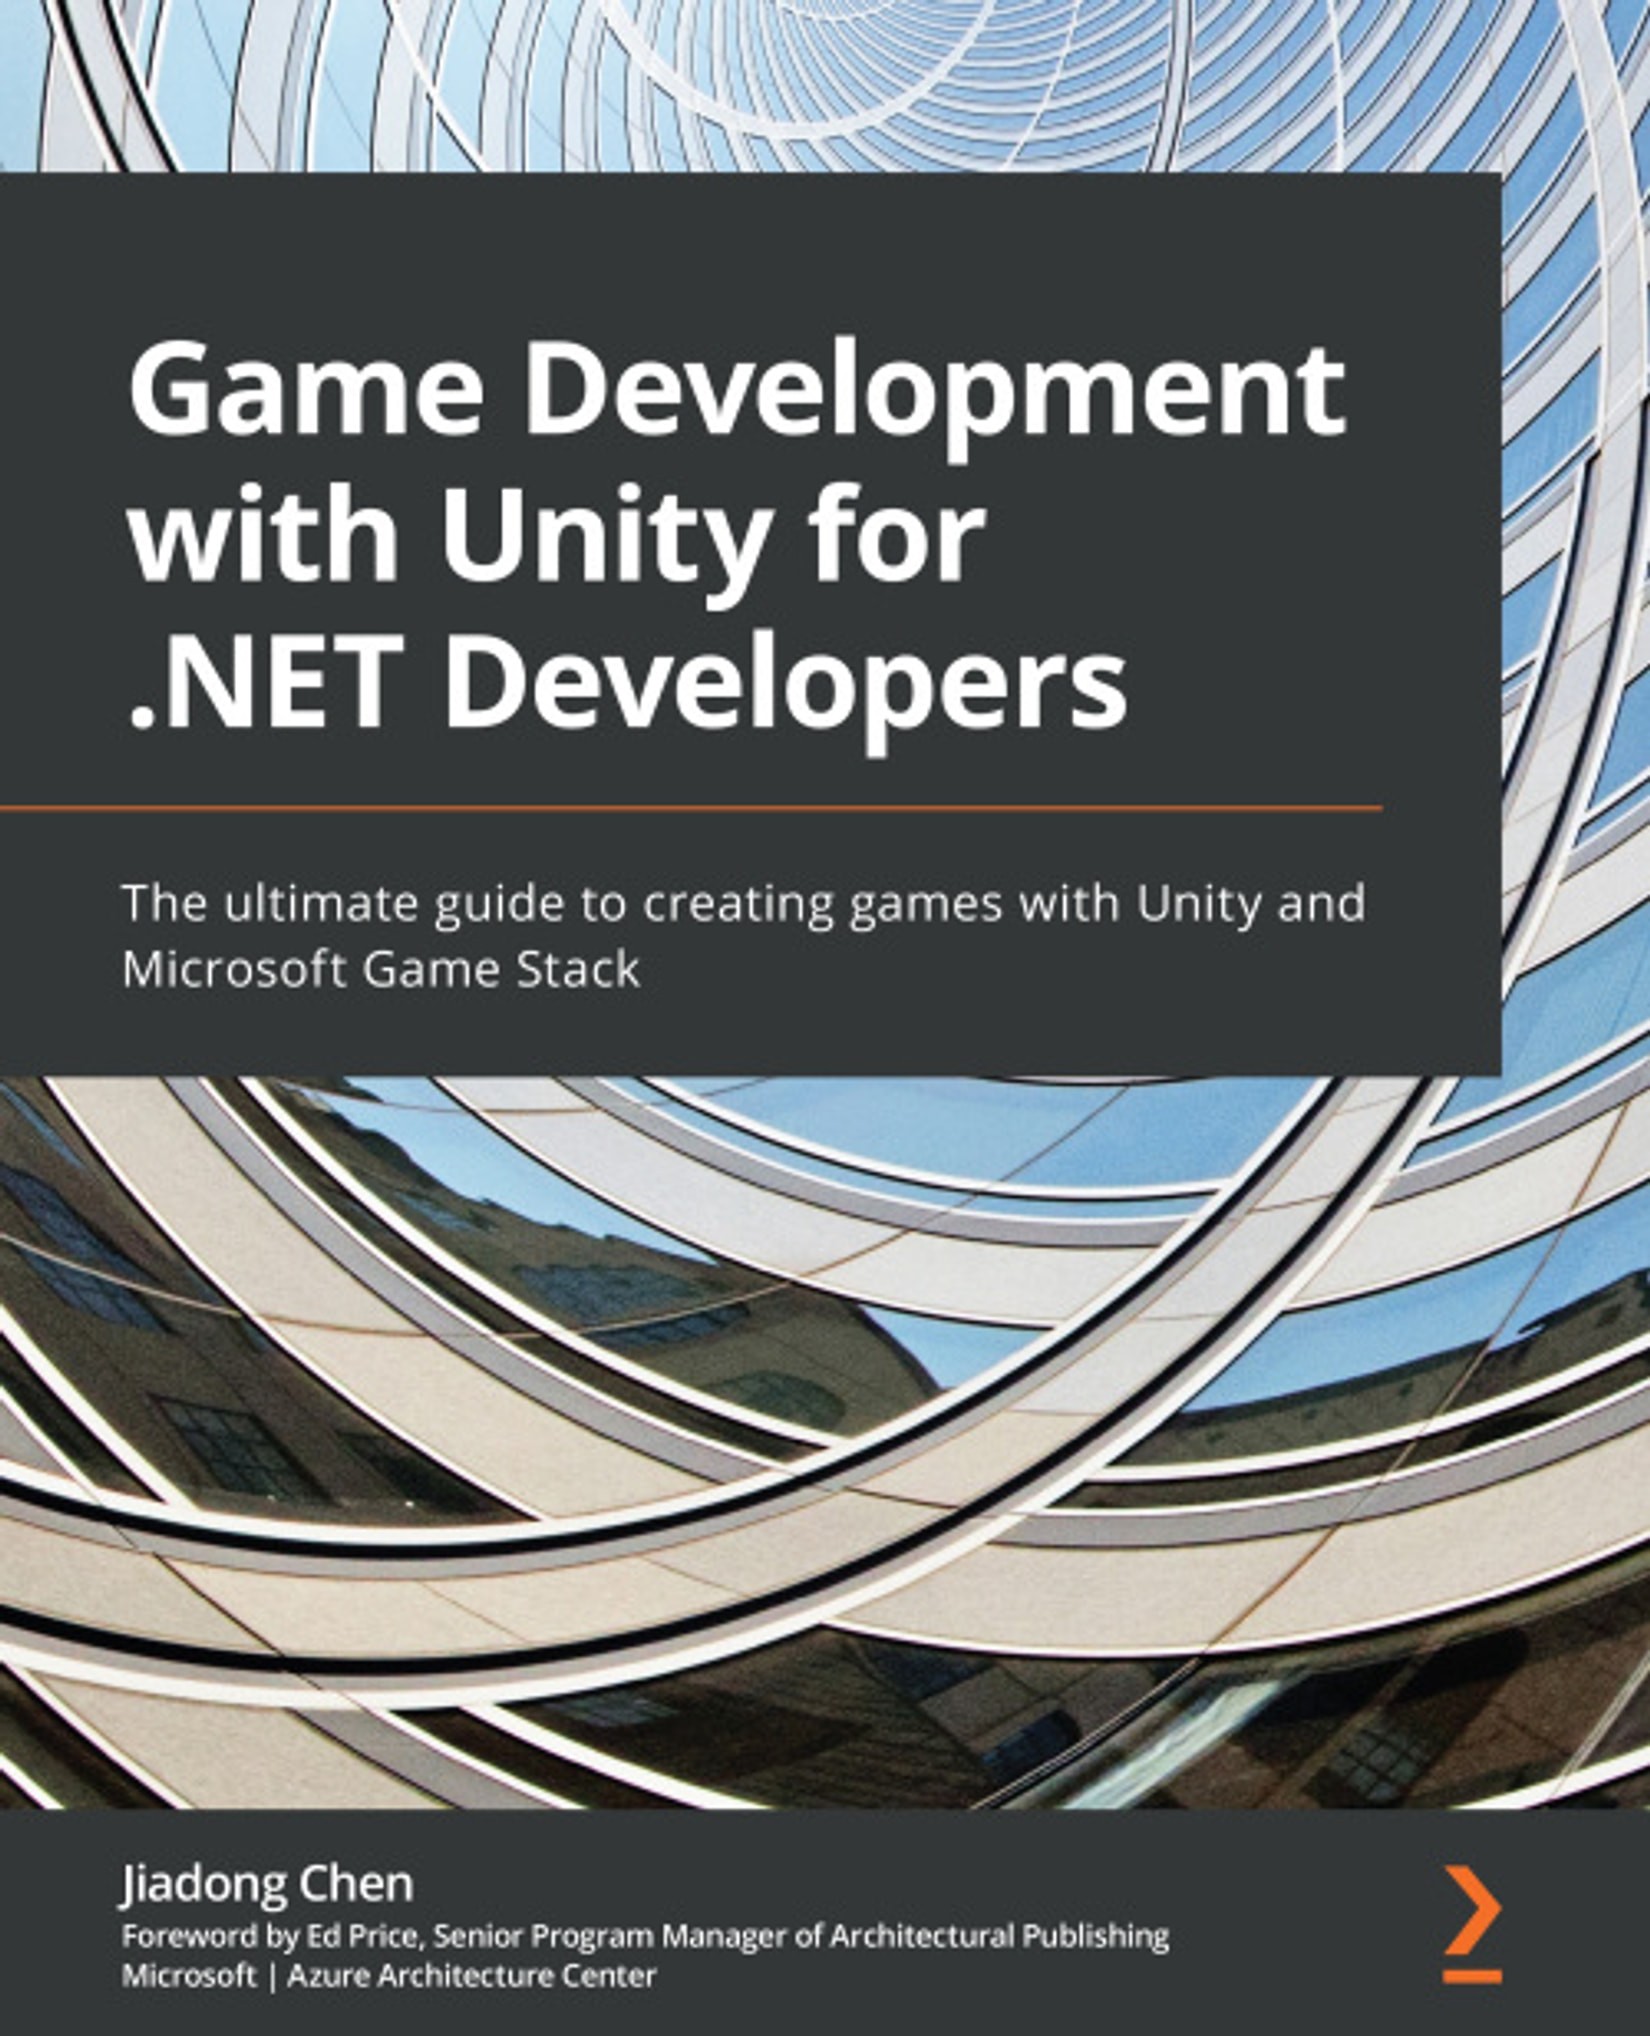 Game Development with Unity for .NET Developers: The Ultimate Guide to Creating Games with Unity and Microsoft Game Stack